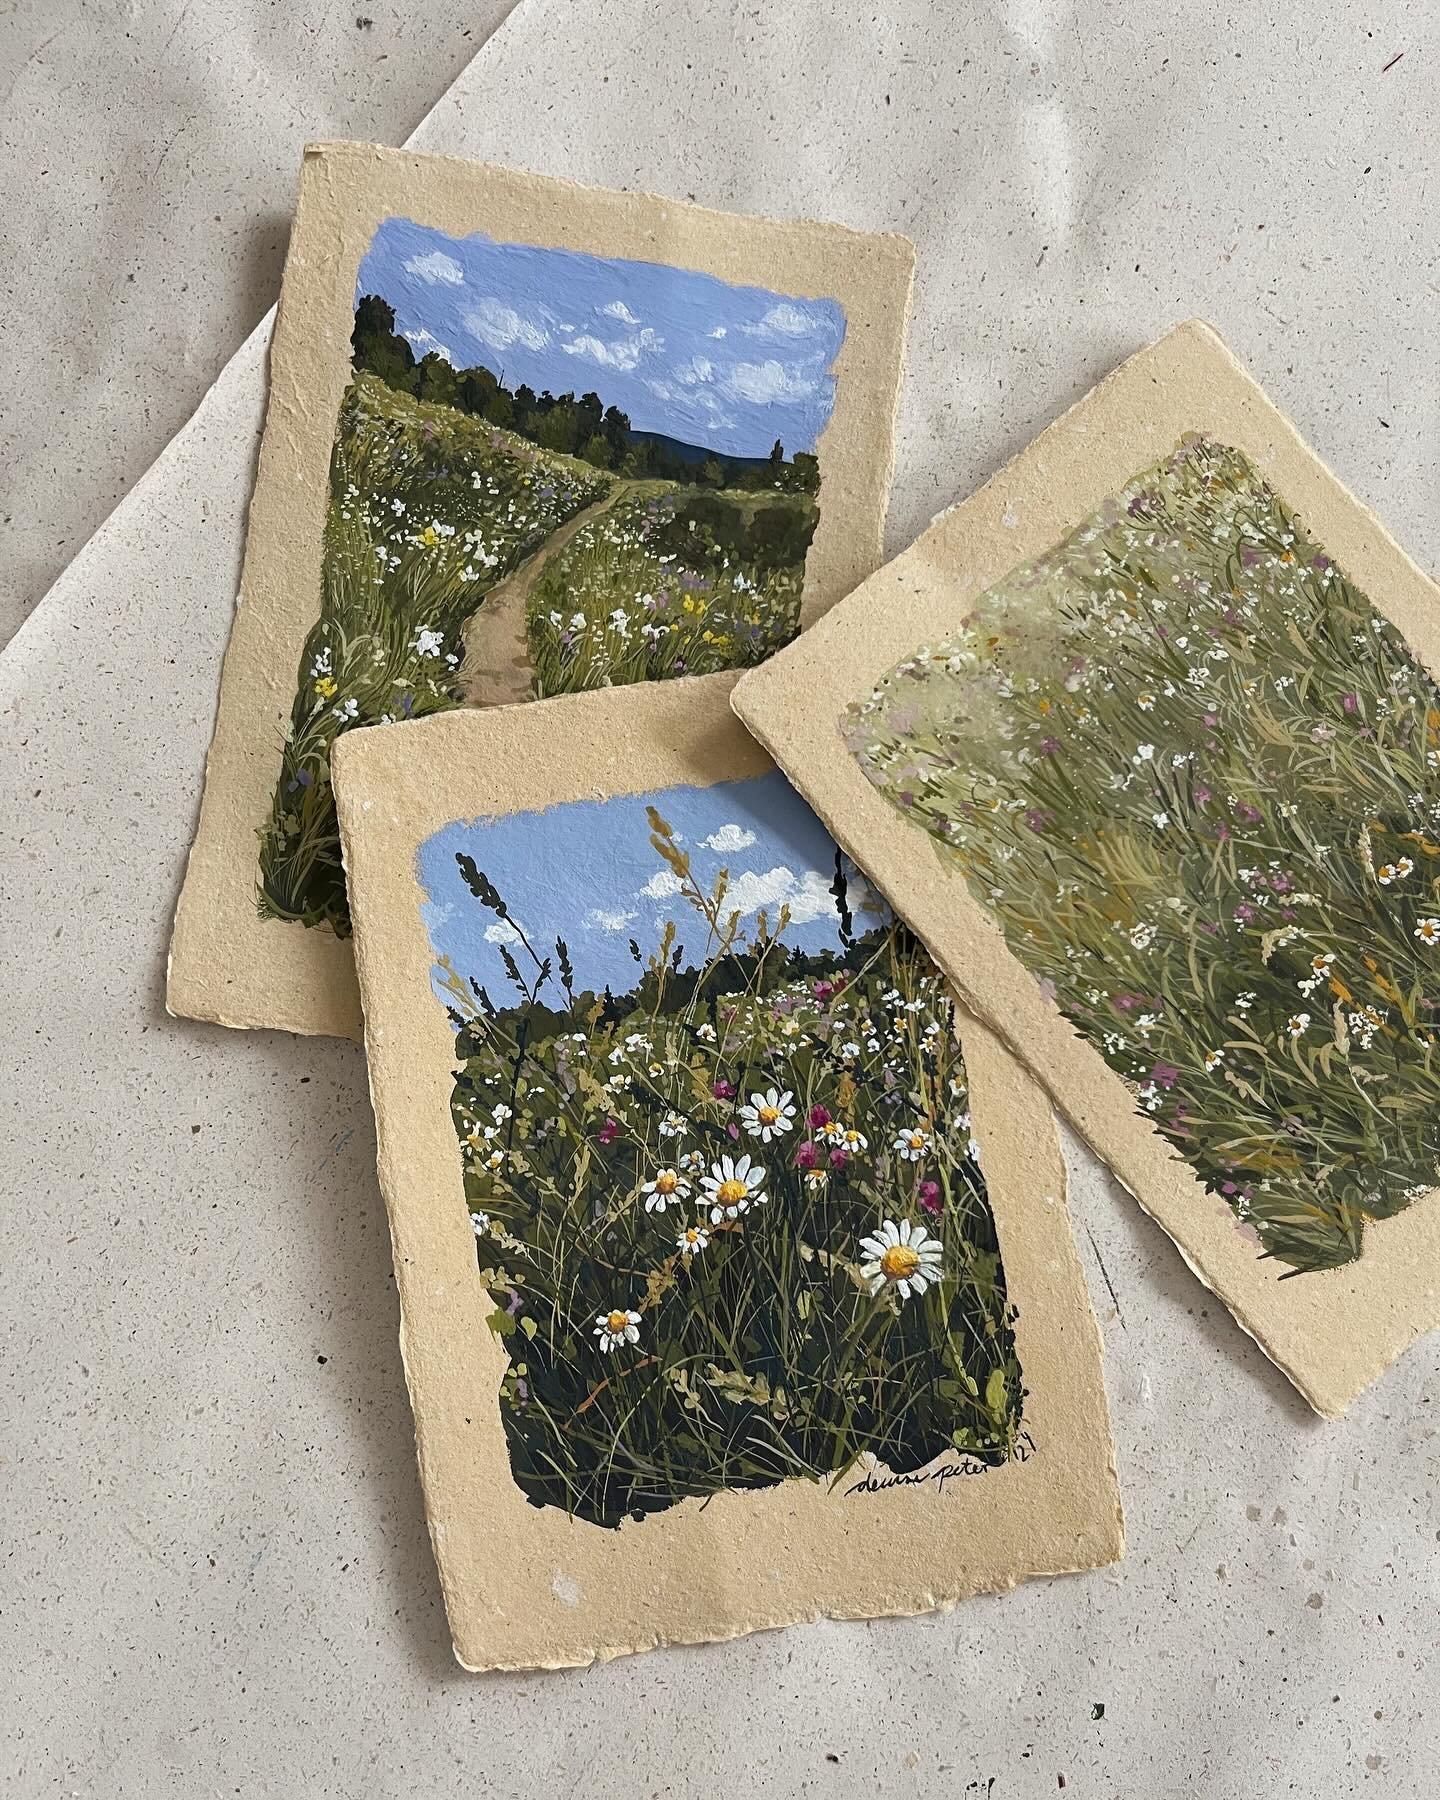 &bdquo;Summer breeze I-III&ldquo; are now available on my website 🌾🌿 all painted with gouache on handmade paper